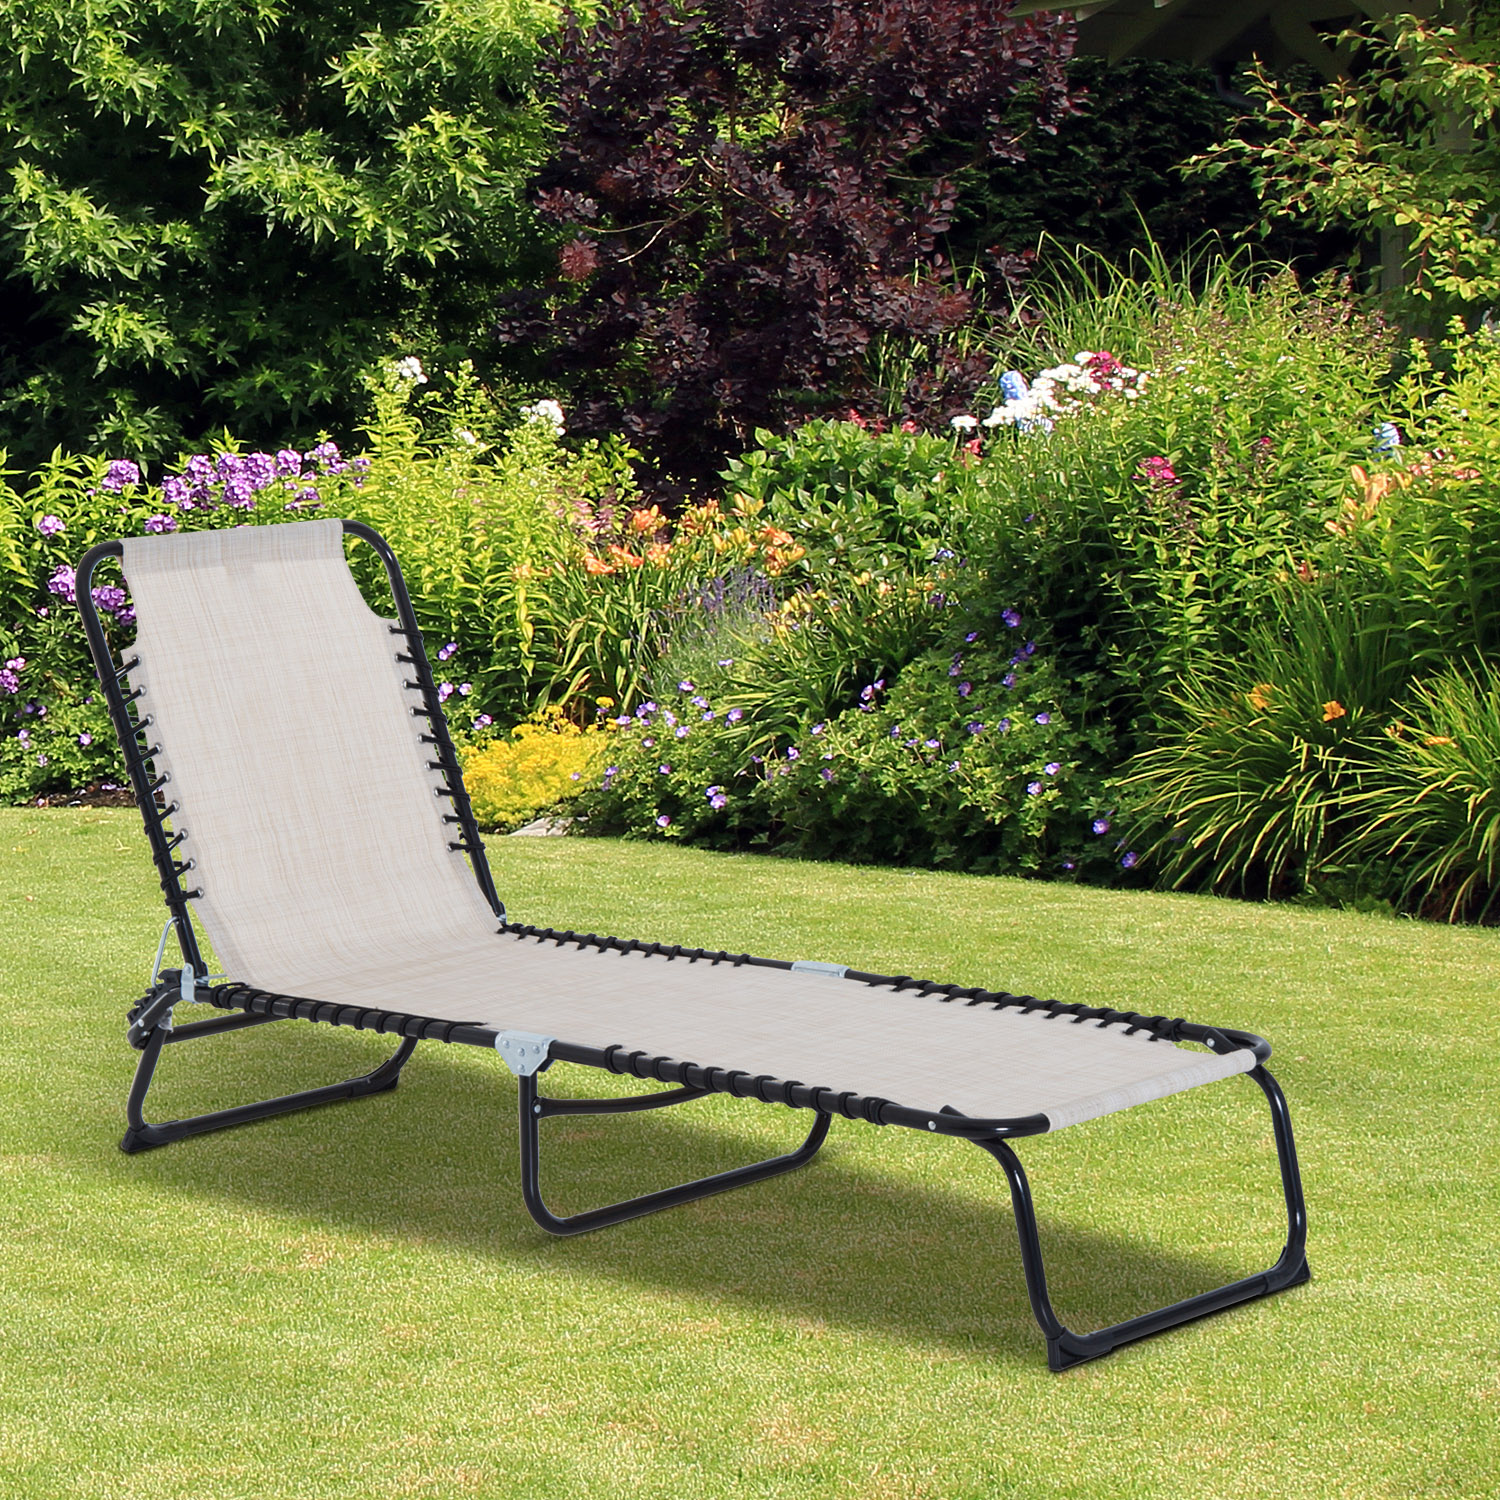 Outsunny Chaise Lounge Pool Chair, Folding, Reclining, Cream White - image 3 of 11